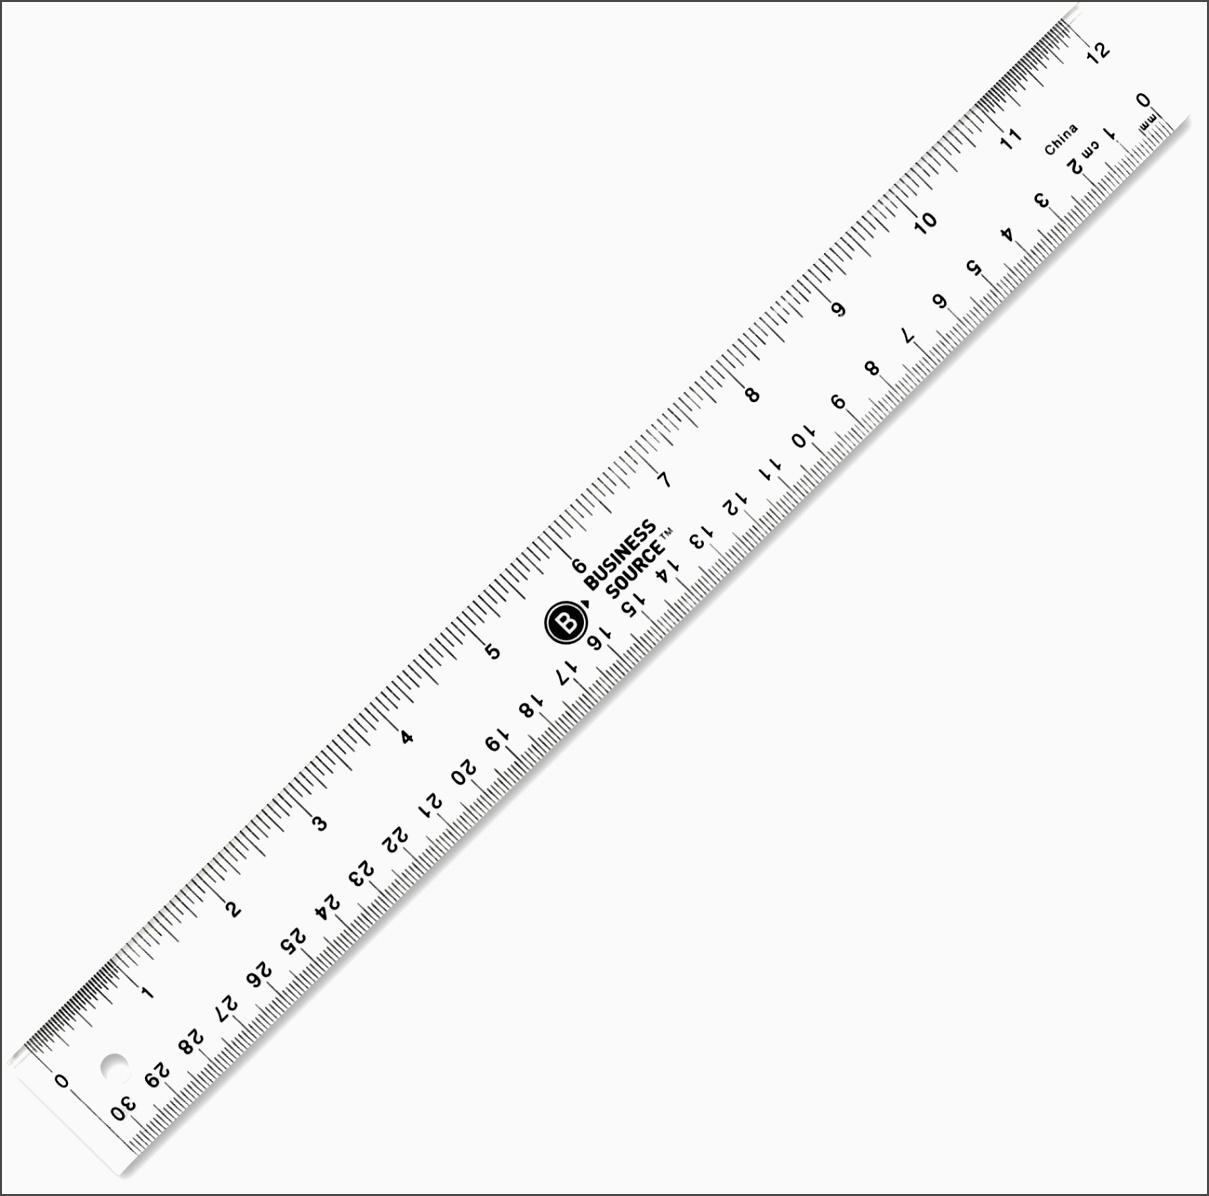 69 Free Printable Rulers | Kittybabylove - Free Printable Cm Ruler